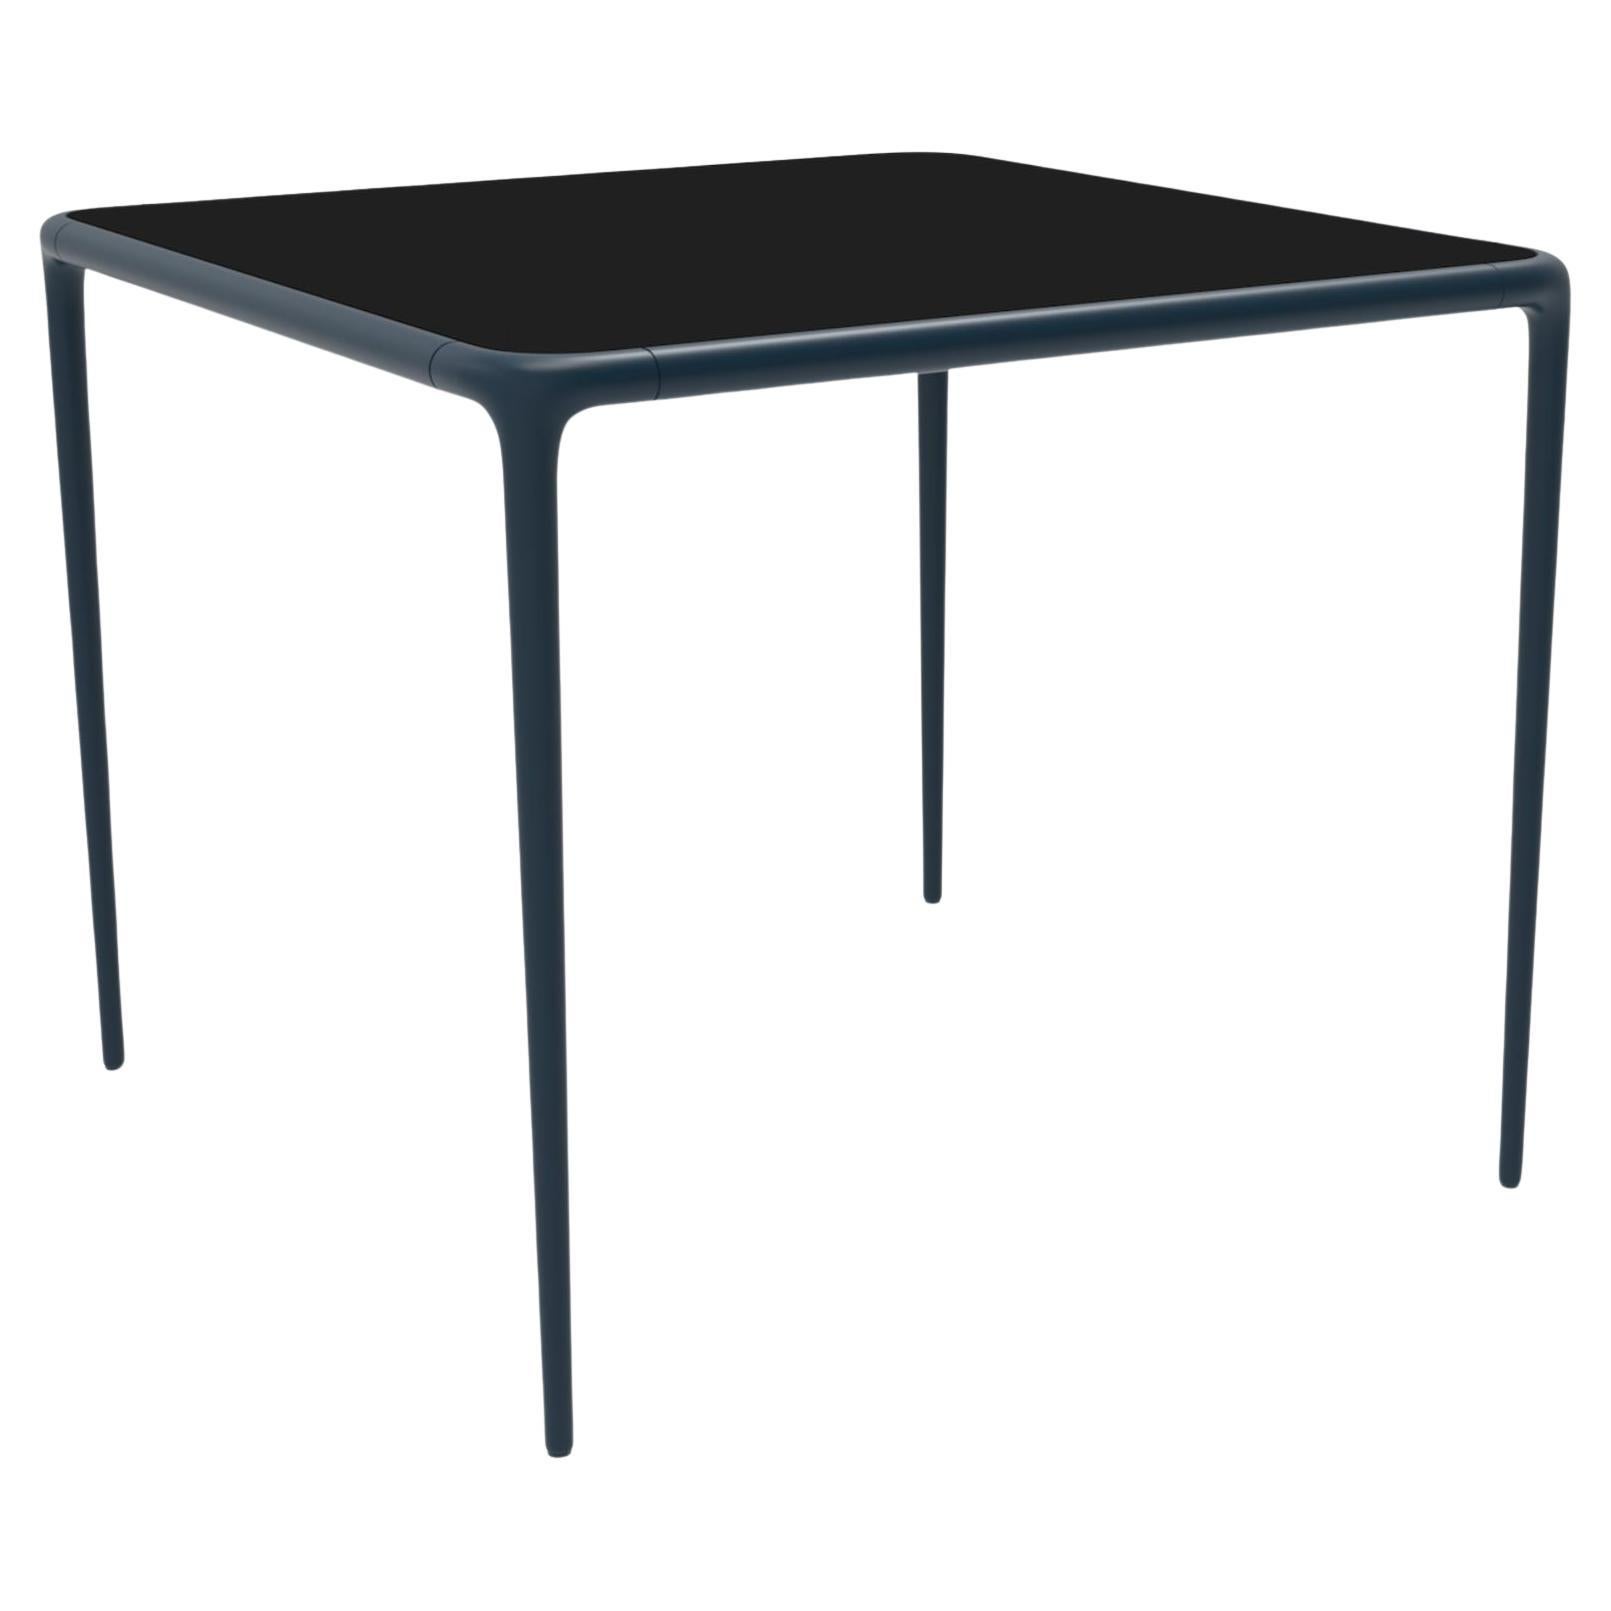 Xaloc Navy Glass Top Table 90 by Mowee For Sale